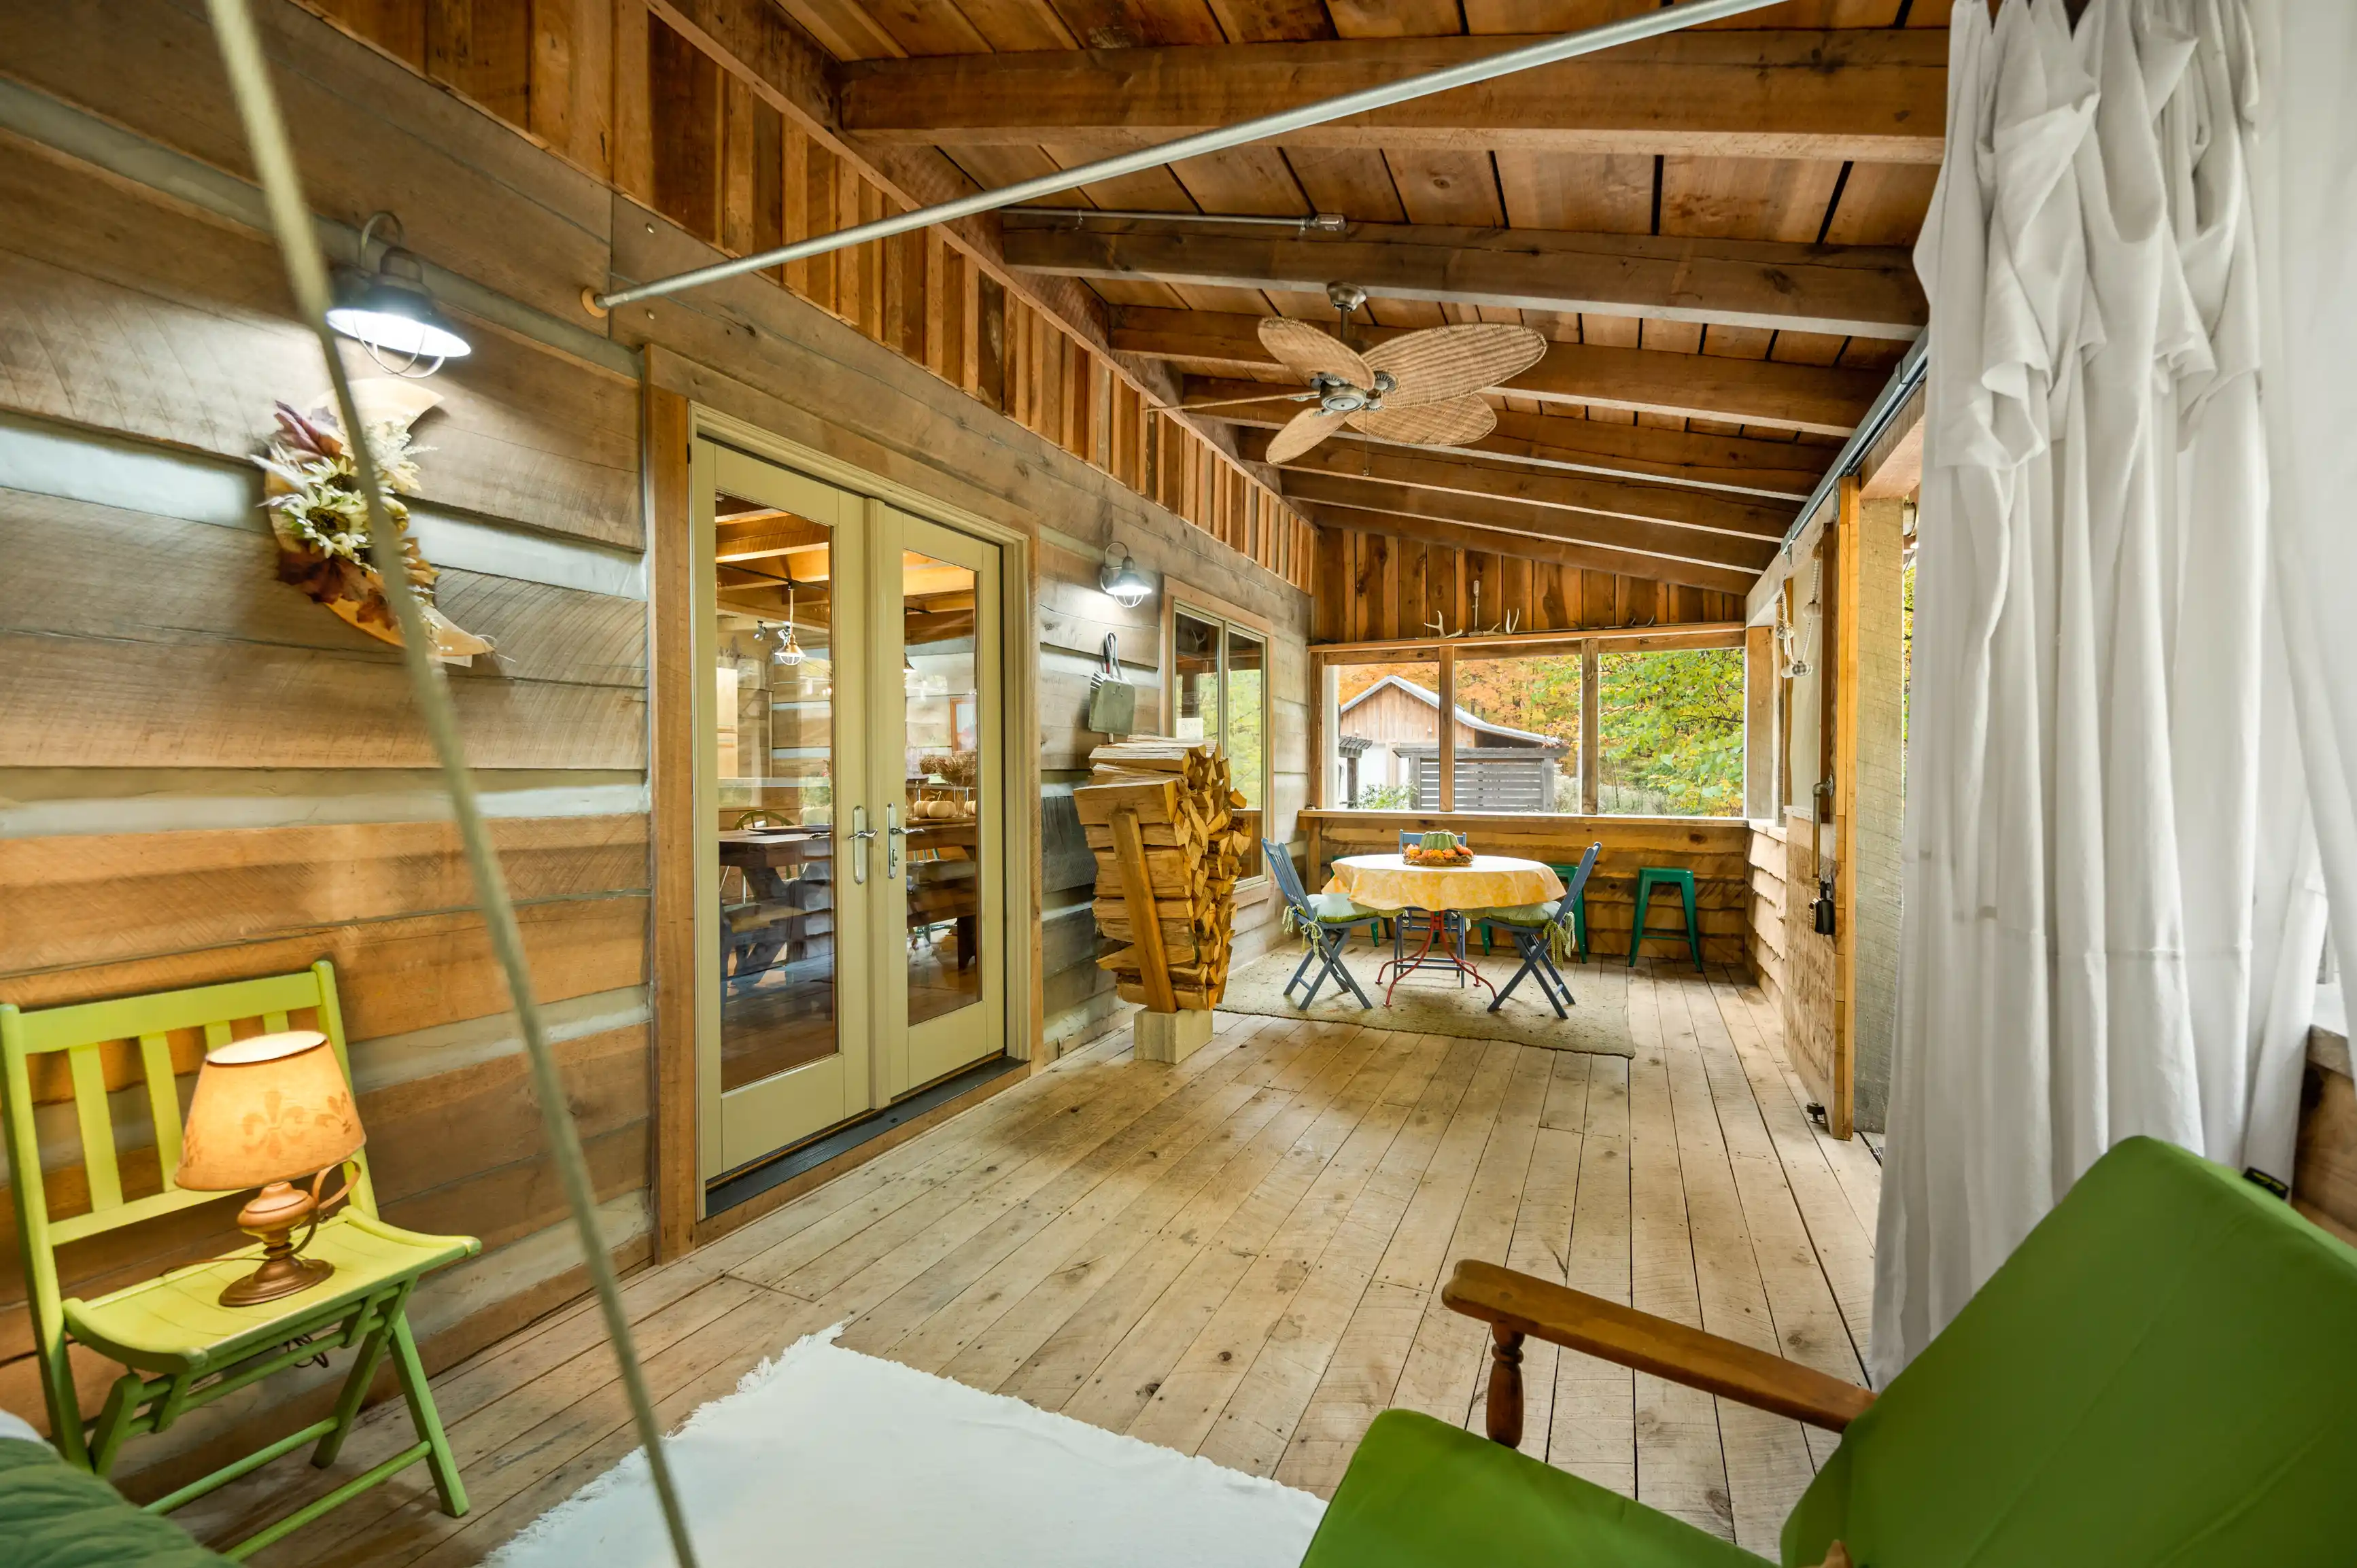 Cozy screened porch with wooden furnishings, ceiling fan, and glass door leading to the interior of a rustic cabin.